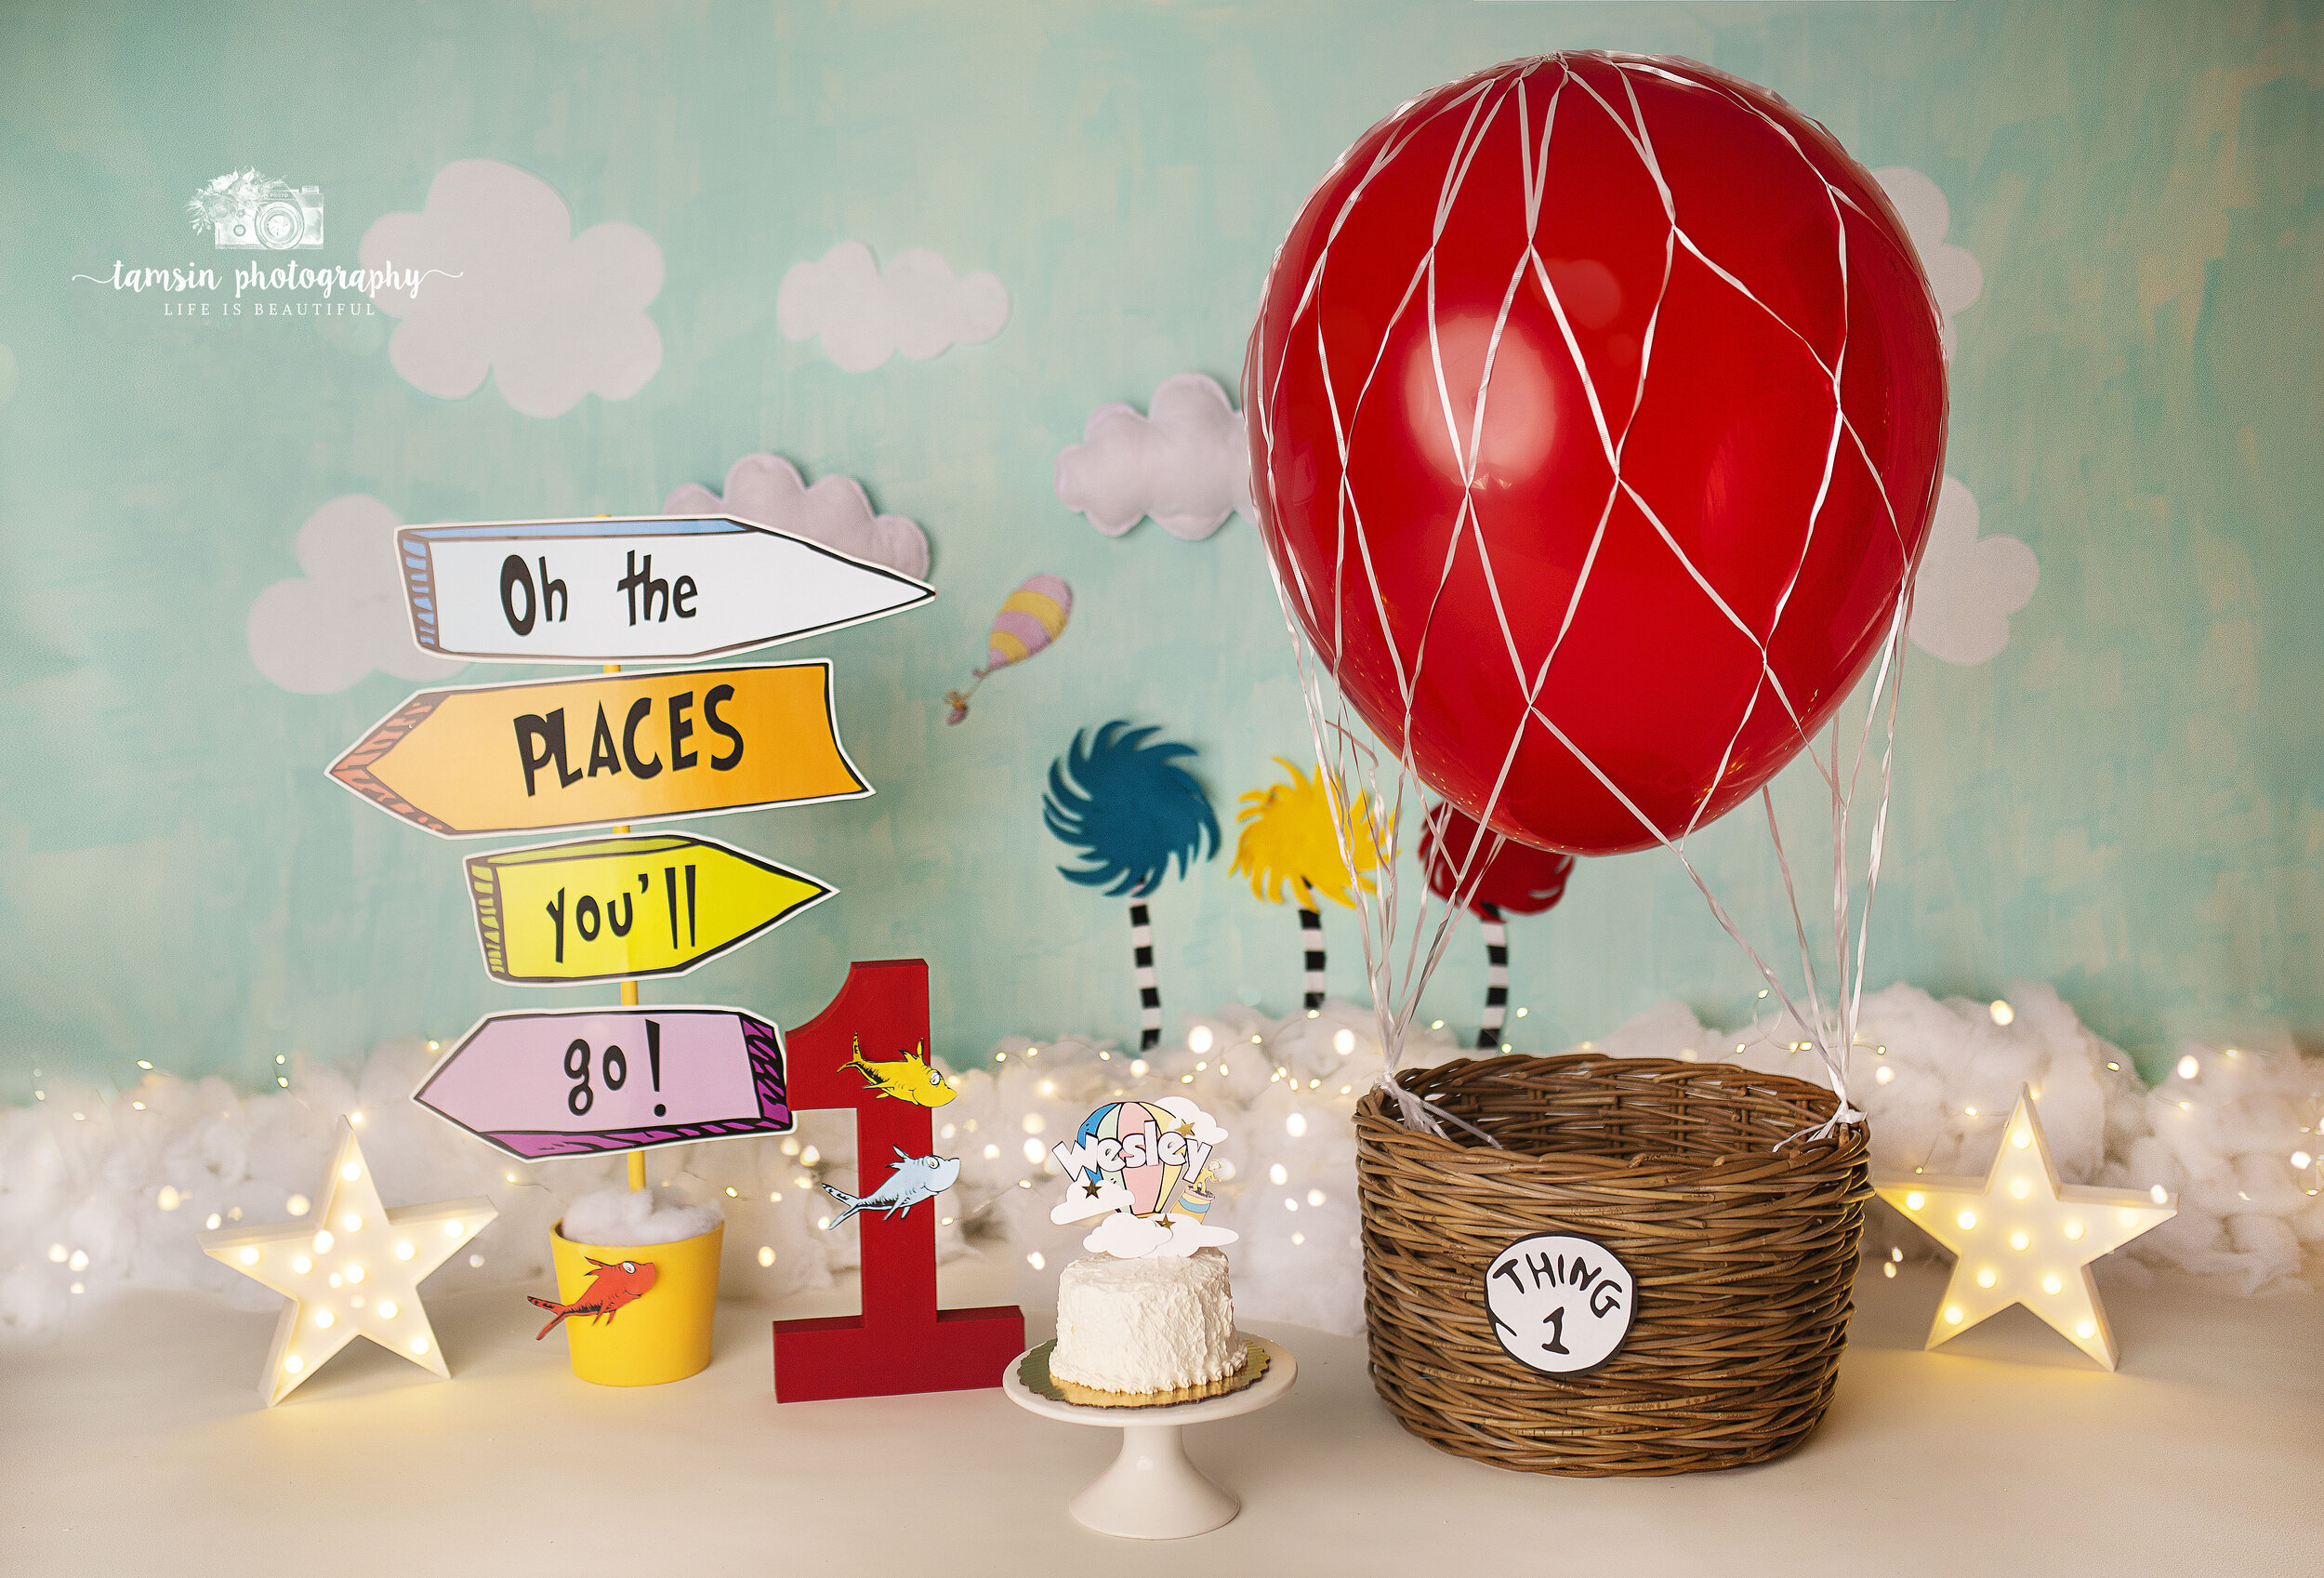 Cake Smash Dr. Seuss Oh The Places You'll Go Cat in the Hat Hot air balloon SITE.jpg